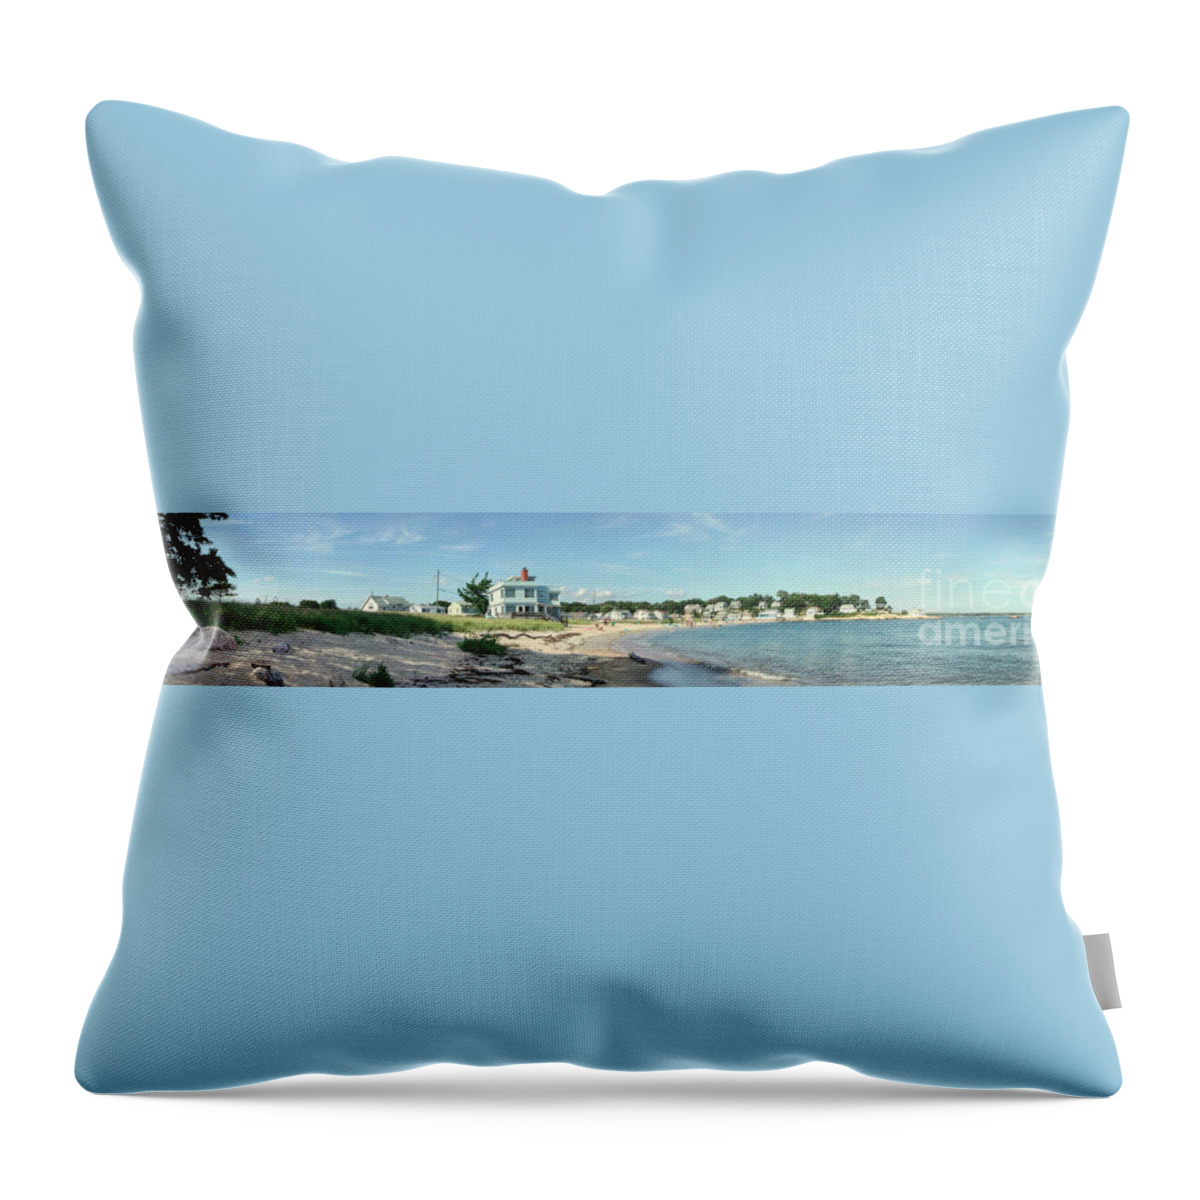 Point O' Woods Throw Pillow featuring the photograph Point O' Woods by Edward Sobuta